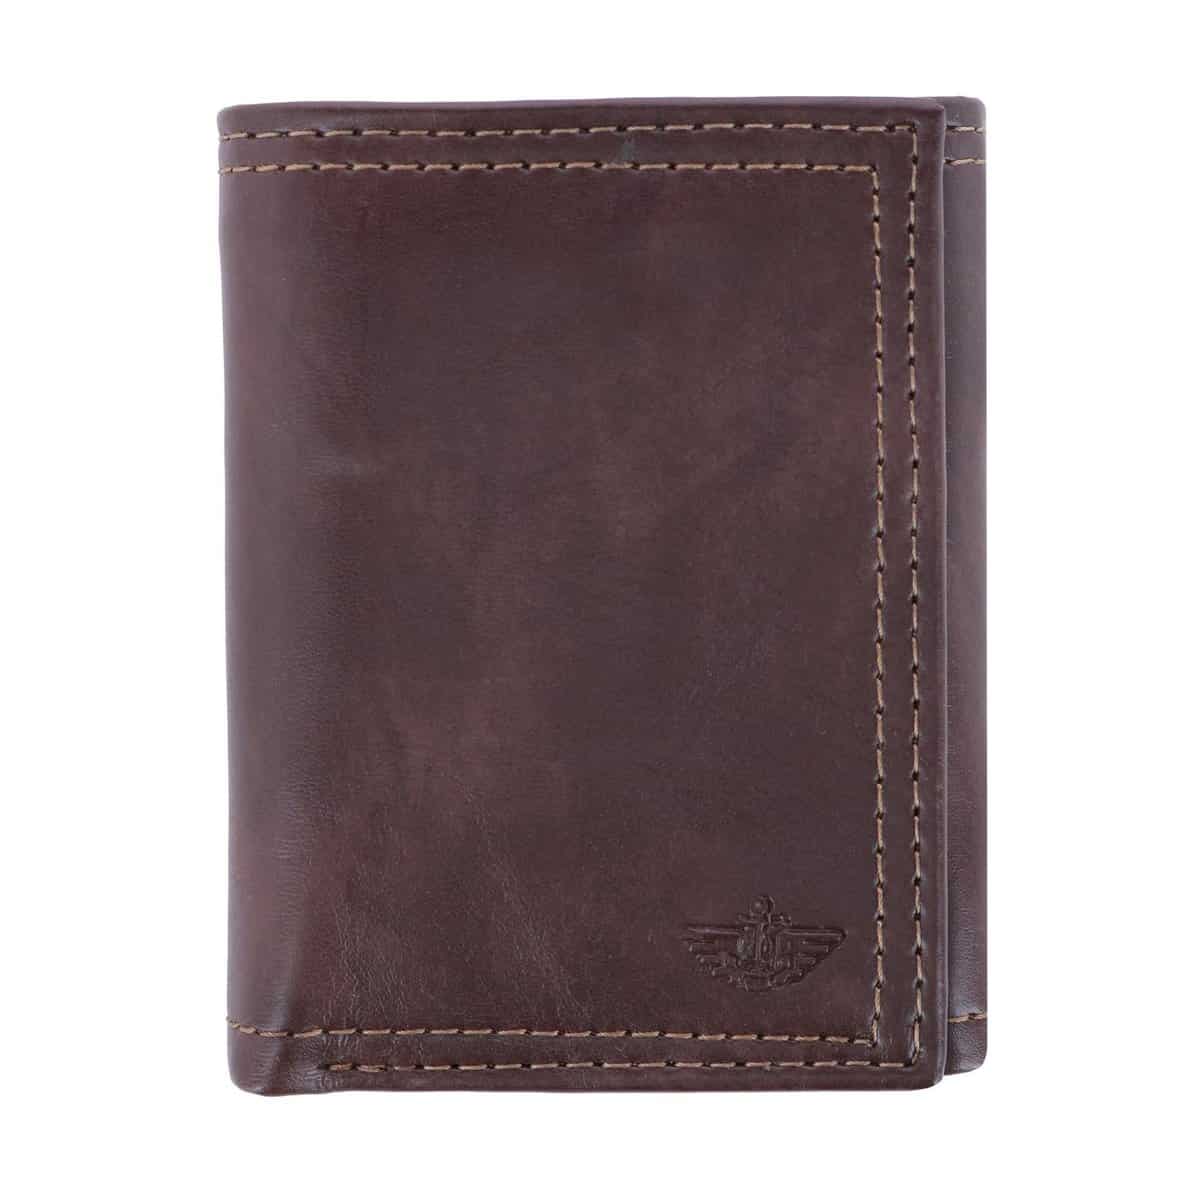 Dockers RFID Security Blocking Wallet trifold